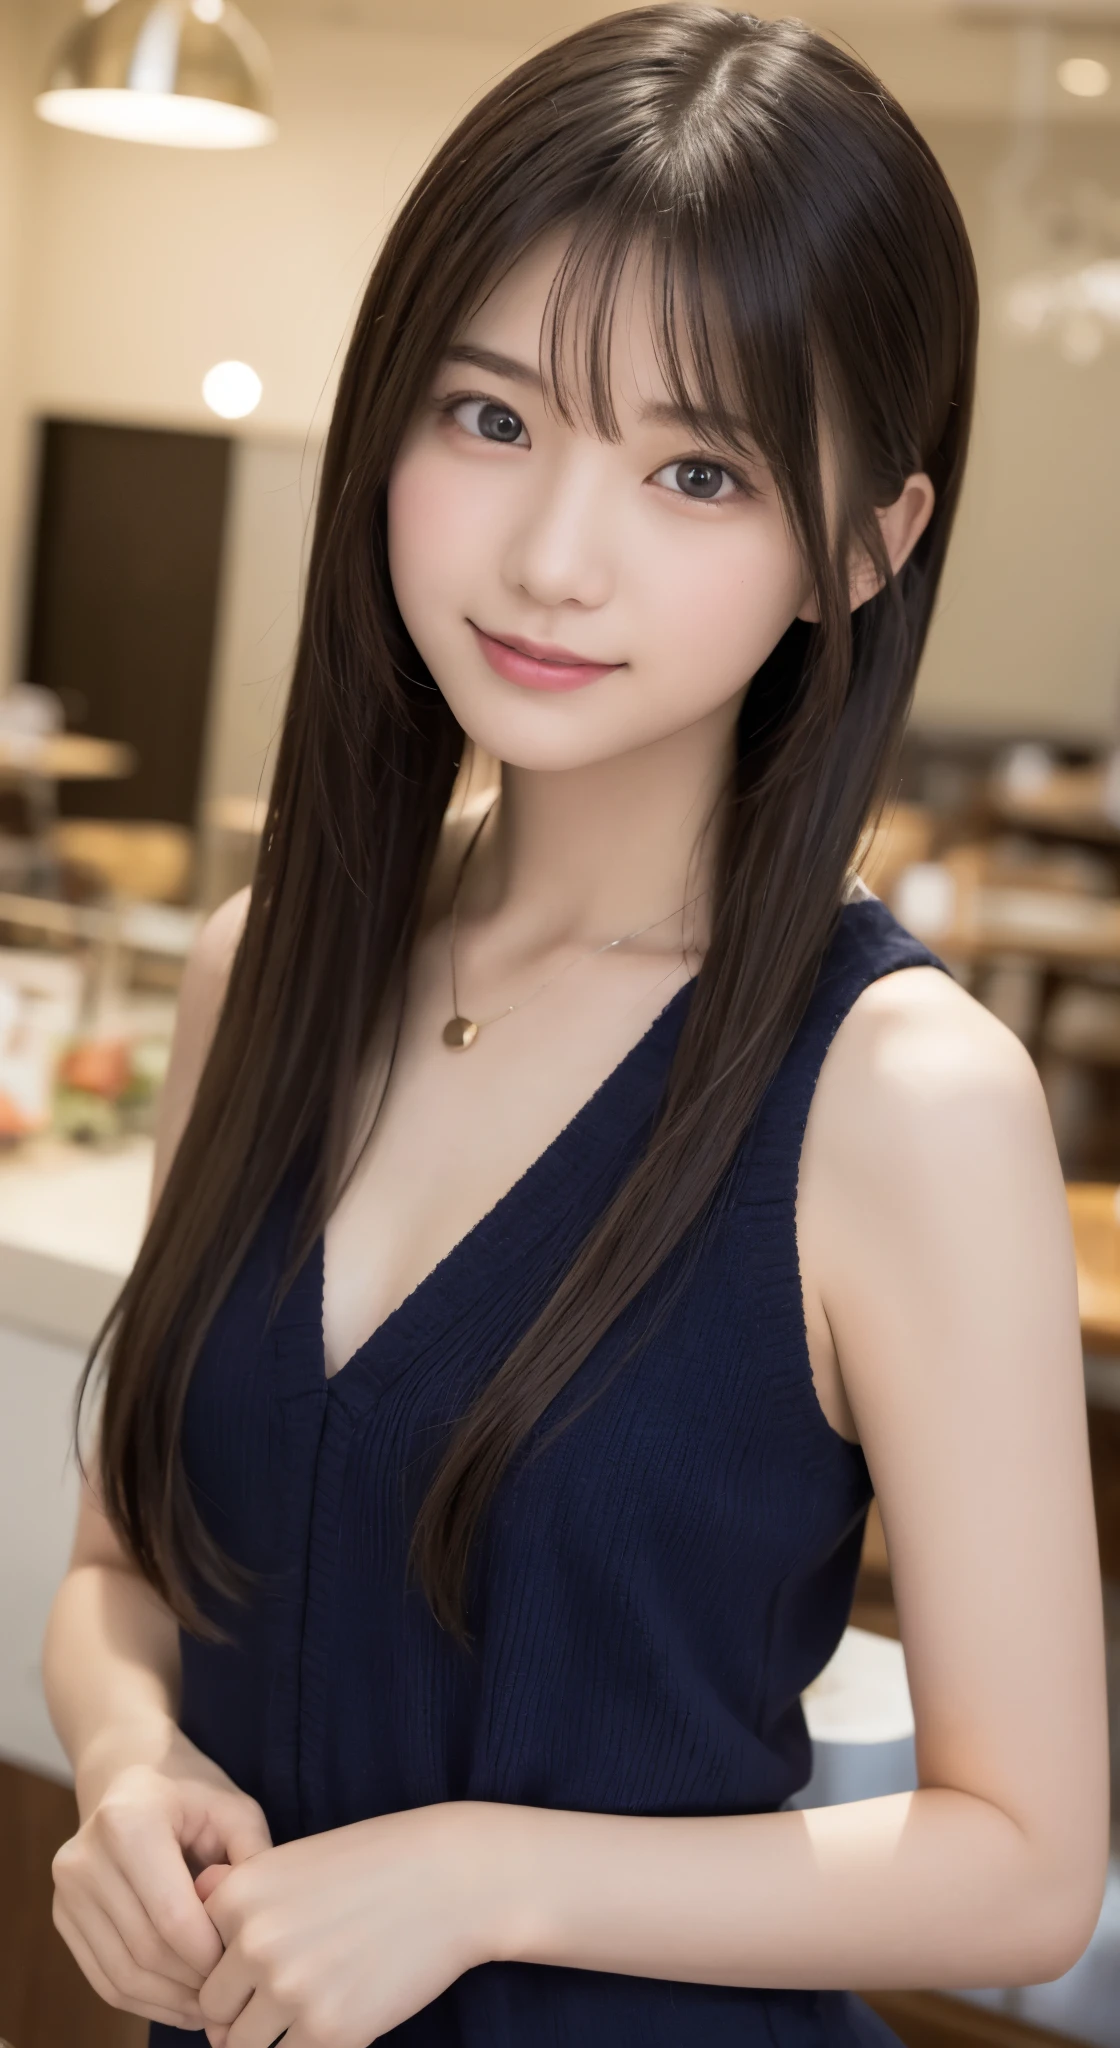 top-quality、​masterpiece)、White background、blurry backround、1girl、a beauty  girl、small tits、Shyness、red blush、超A high resolution、Beautie、cute little、solo、A  Japanese Lady。15yo student、hi-school girl、a smile。Beautiful young woman  model